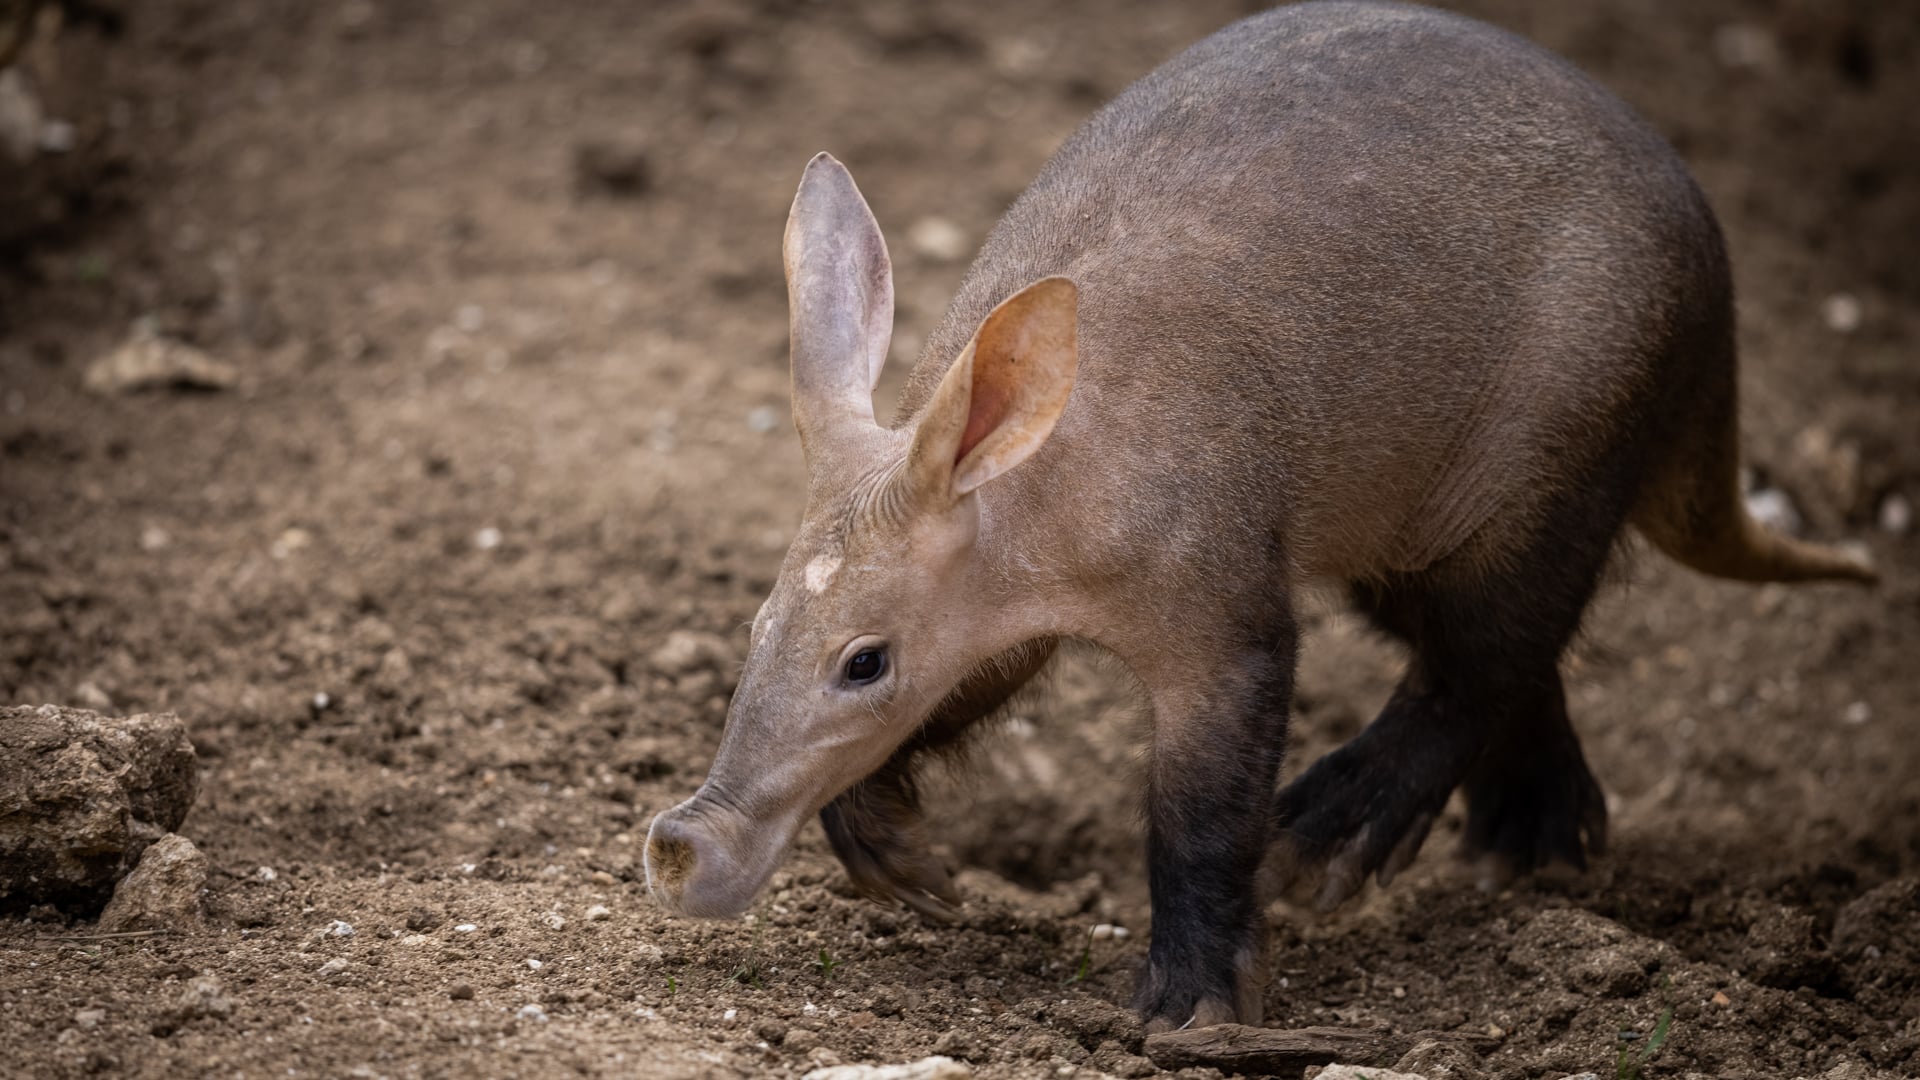 An aardvark in some sand – one of Africa’s most elusive safari animals.